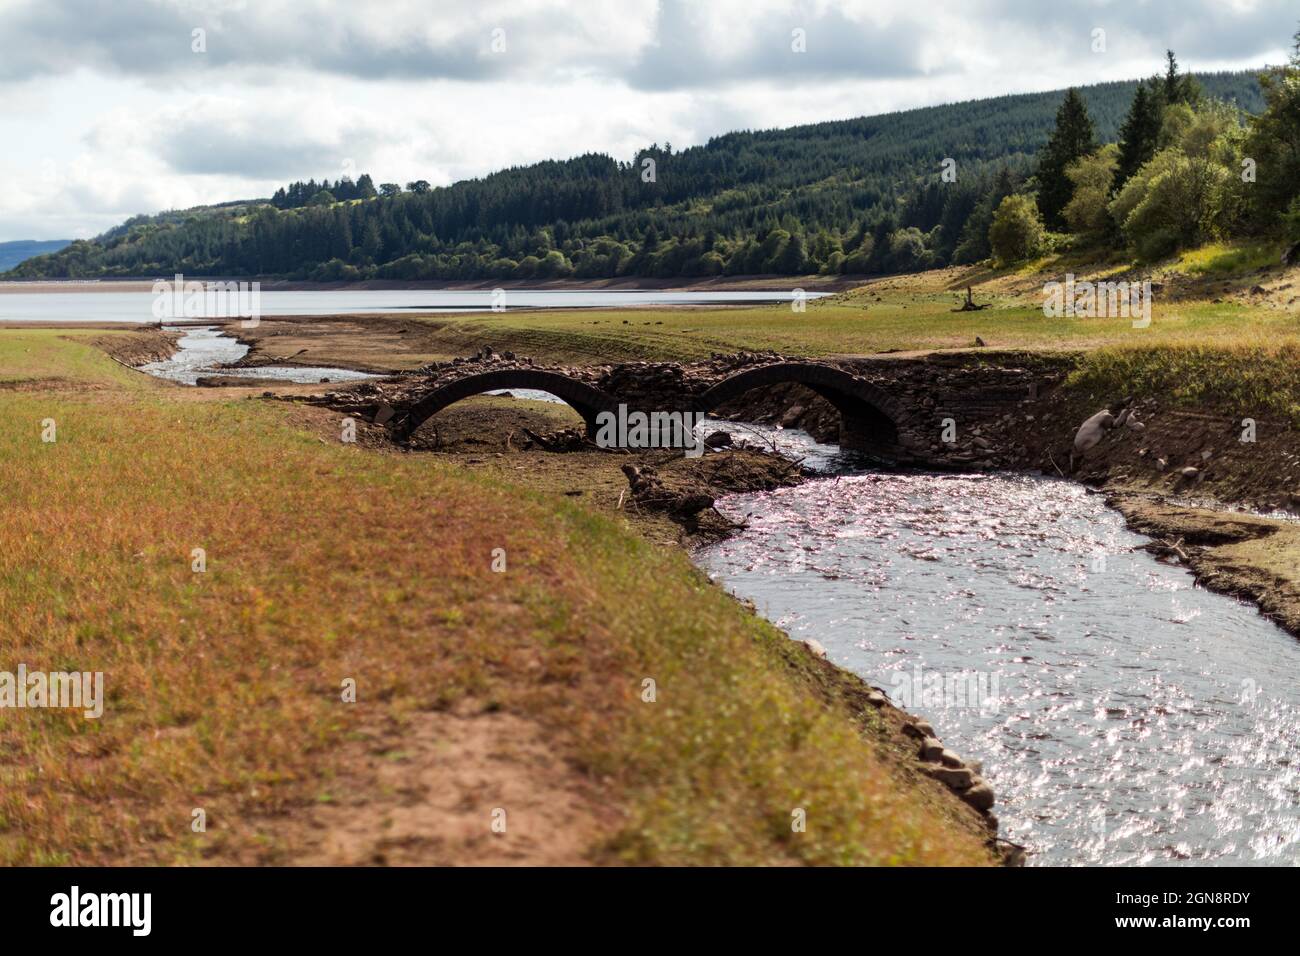 Llwyn Onn reservoir, Merthyr Tydfil, South Wales, UK.  23 September 2021.  UK weather:  Lower water levels than normal at this reservoir has uncovered an old bridge, Pont Yr Daf, normally underwater.  Credit: Andrew Bartlett/Alamy Live News. Stock Photo